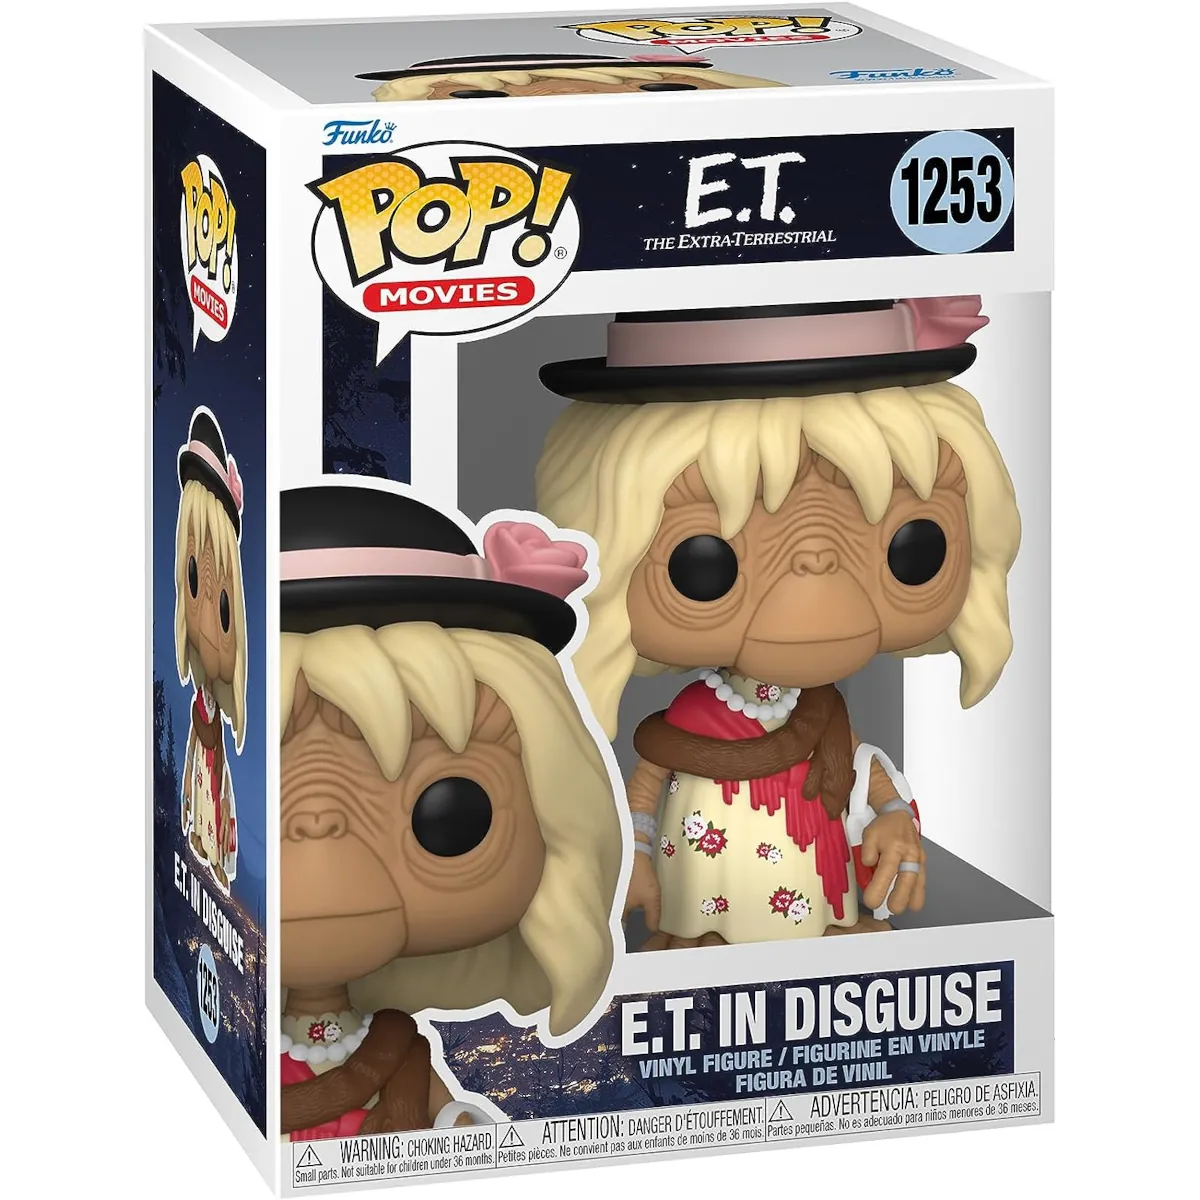 Funko Pop! Movies E.T. The Extra-Terrestrial E.T. in Disguise Collectable Vinyl Figure Box Front